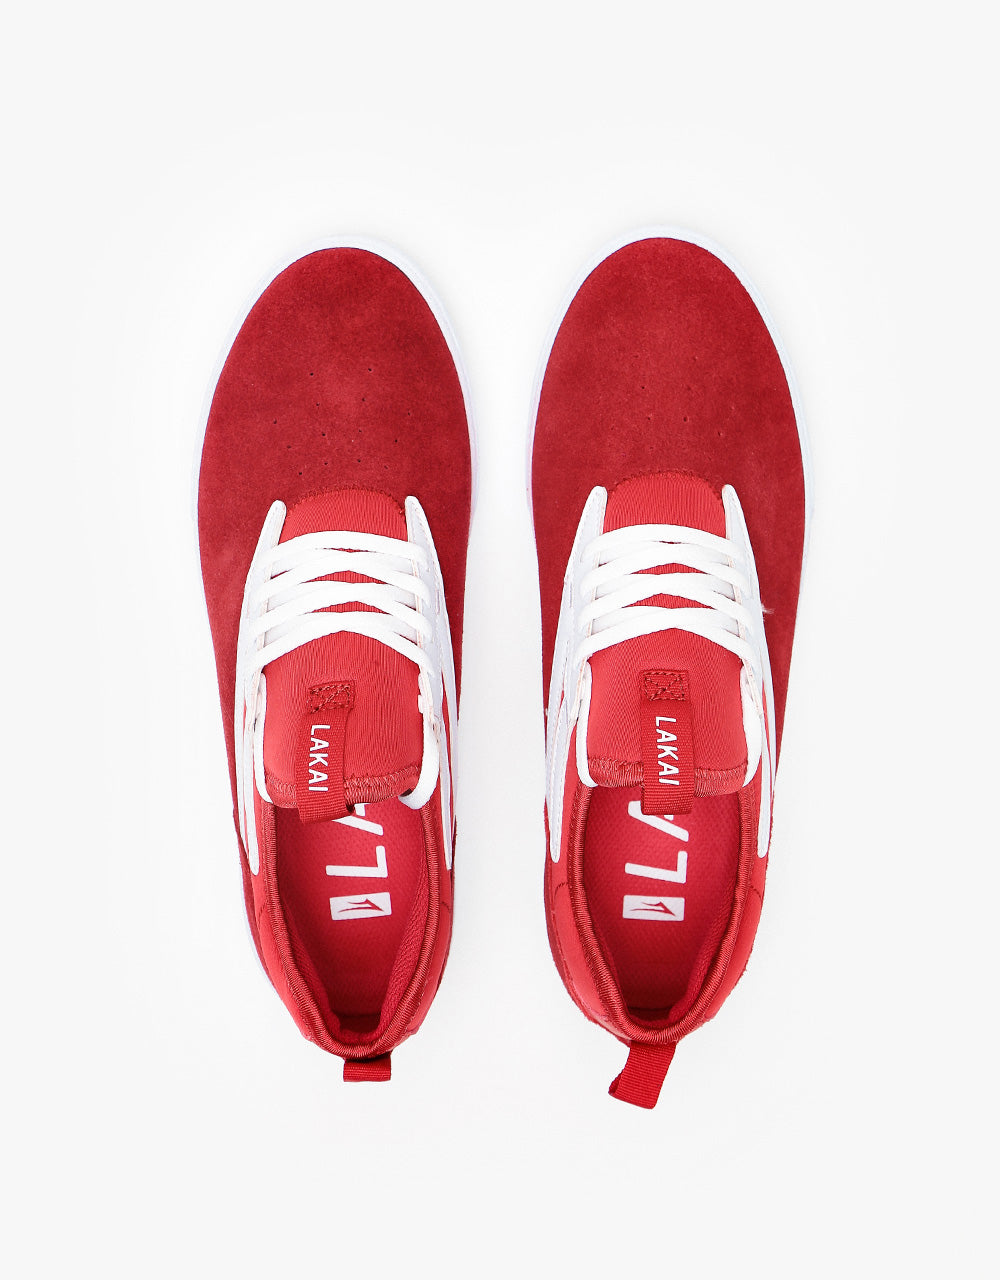 Lakai Dover Skate Shoes - Red Suede